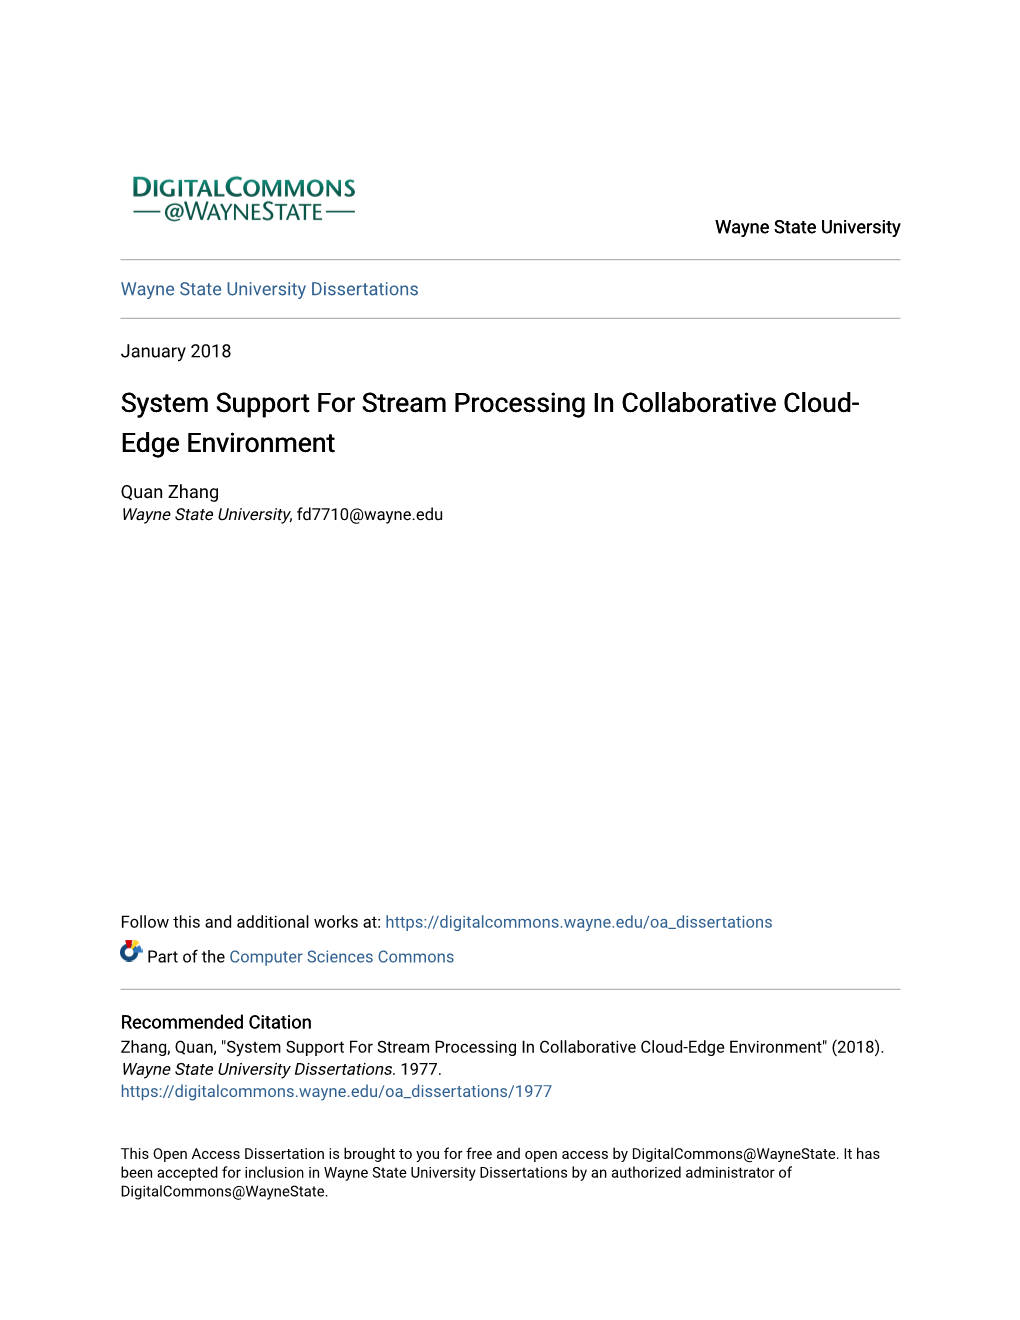 System Support for Stream Processing in Collaborative Cloud- Edge Environment